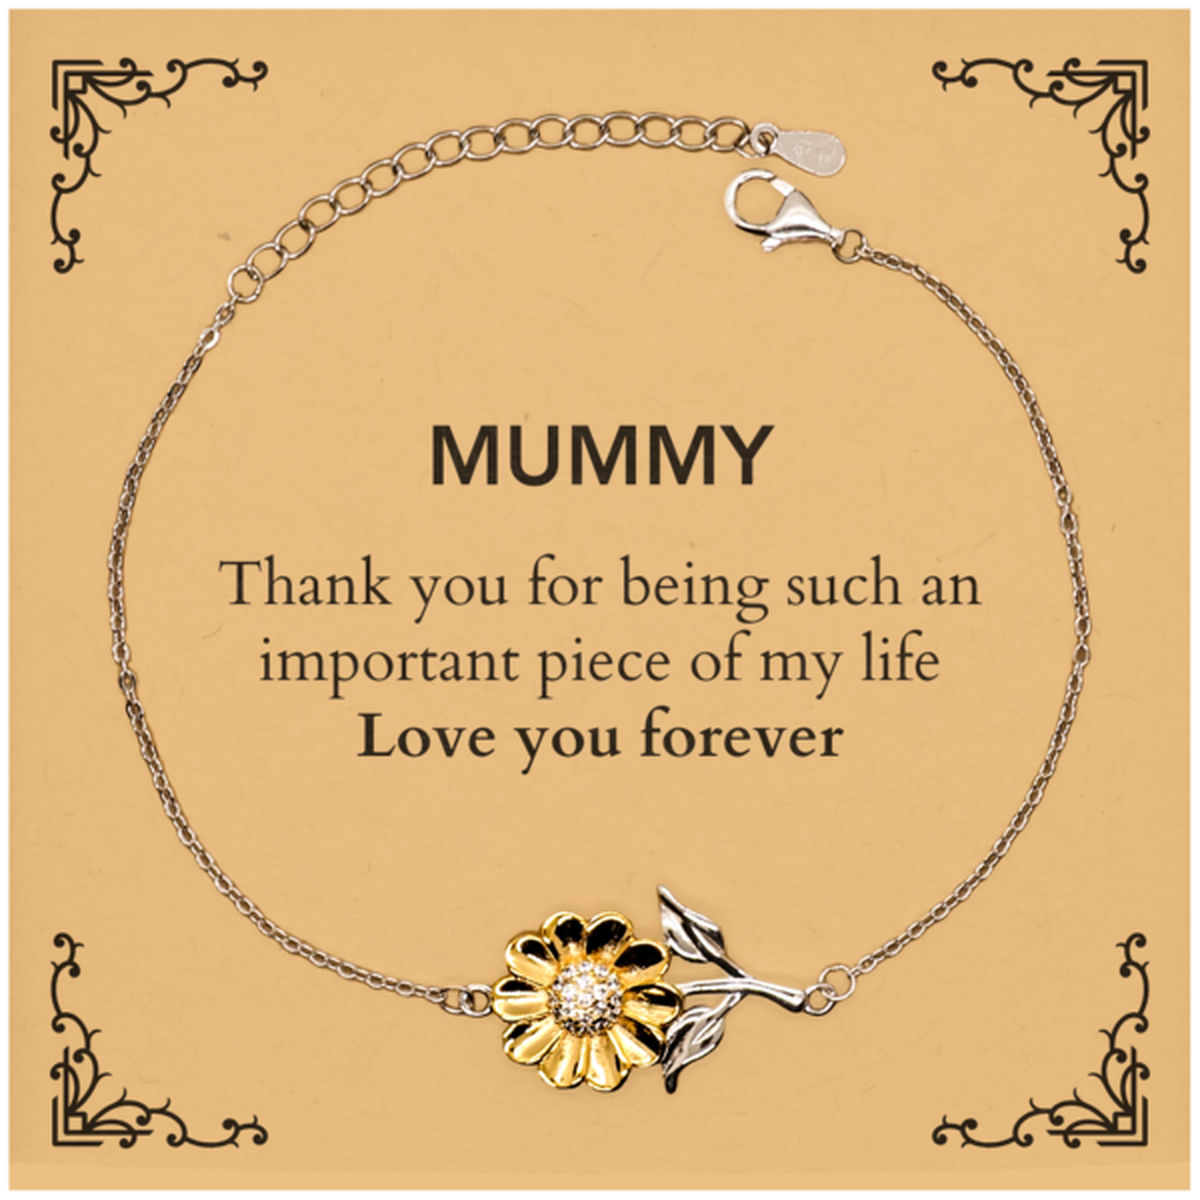 Appropriate Mummy Sunflower Bracelet Epic Birthday Gifts for Mummy Thank you for being such an important piece of my life Mummy Christmas Mothers Fathers Day